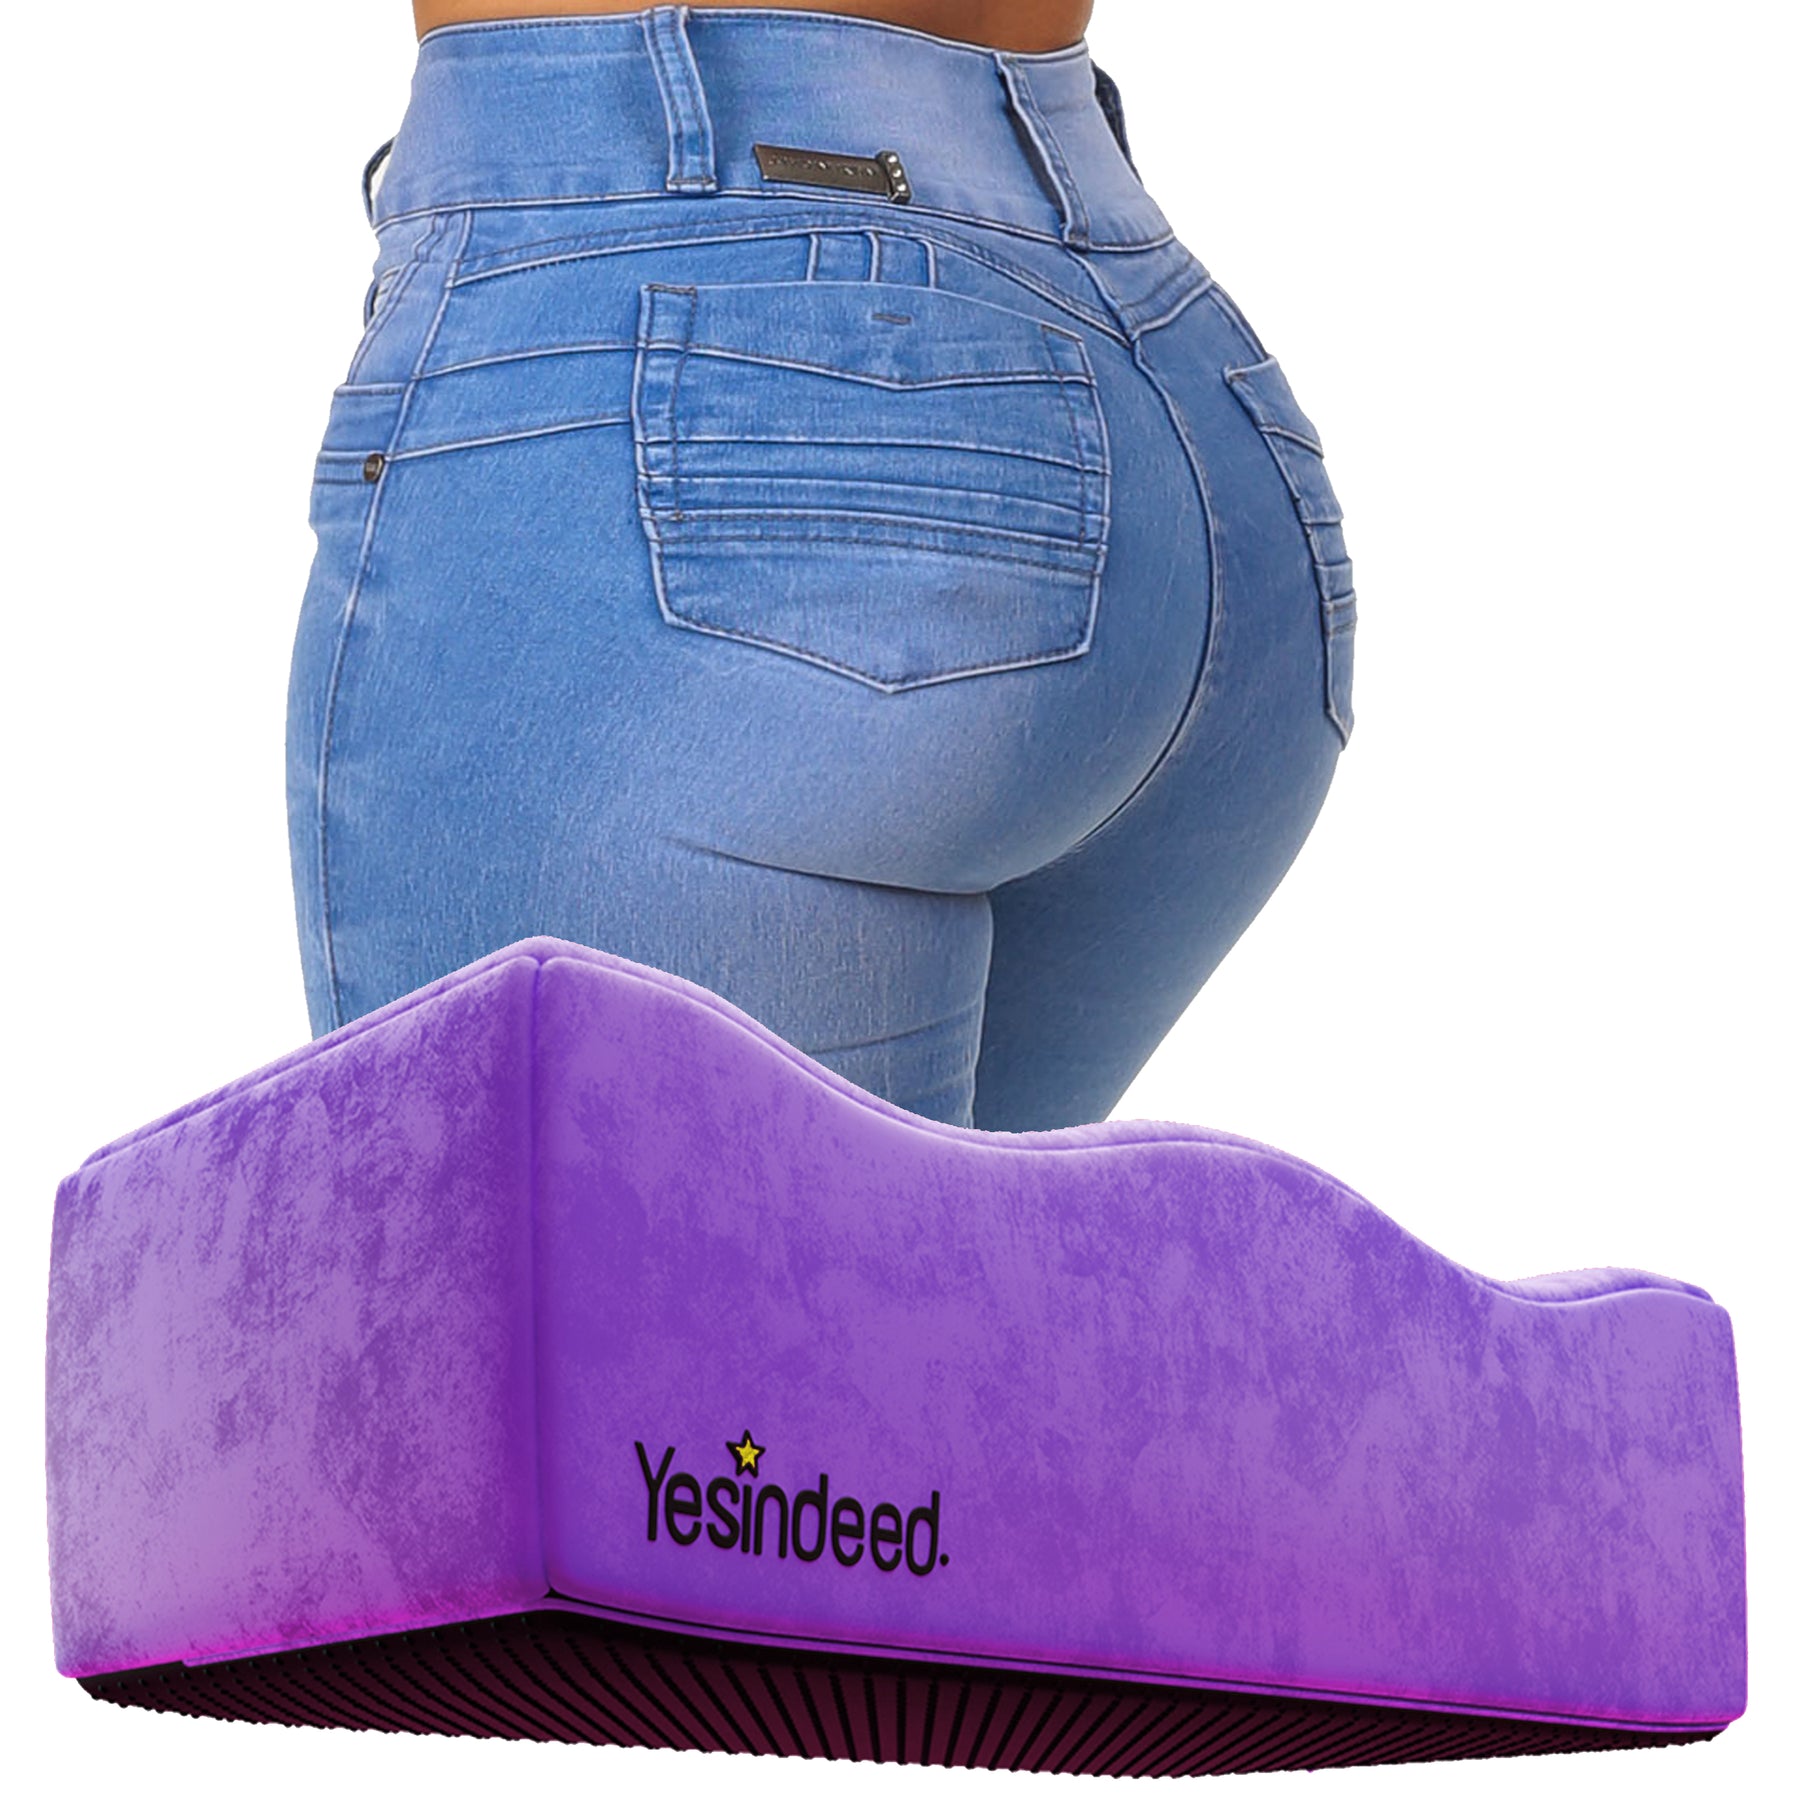 Yesindeed The Original Brazilian Butt Lift Pillow – Dr. Approved for Post Surgery Recovery Seat – BBL Foam Pillow + Cover Bag Firm Support Cushion